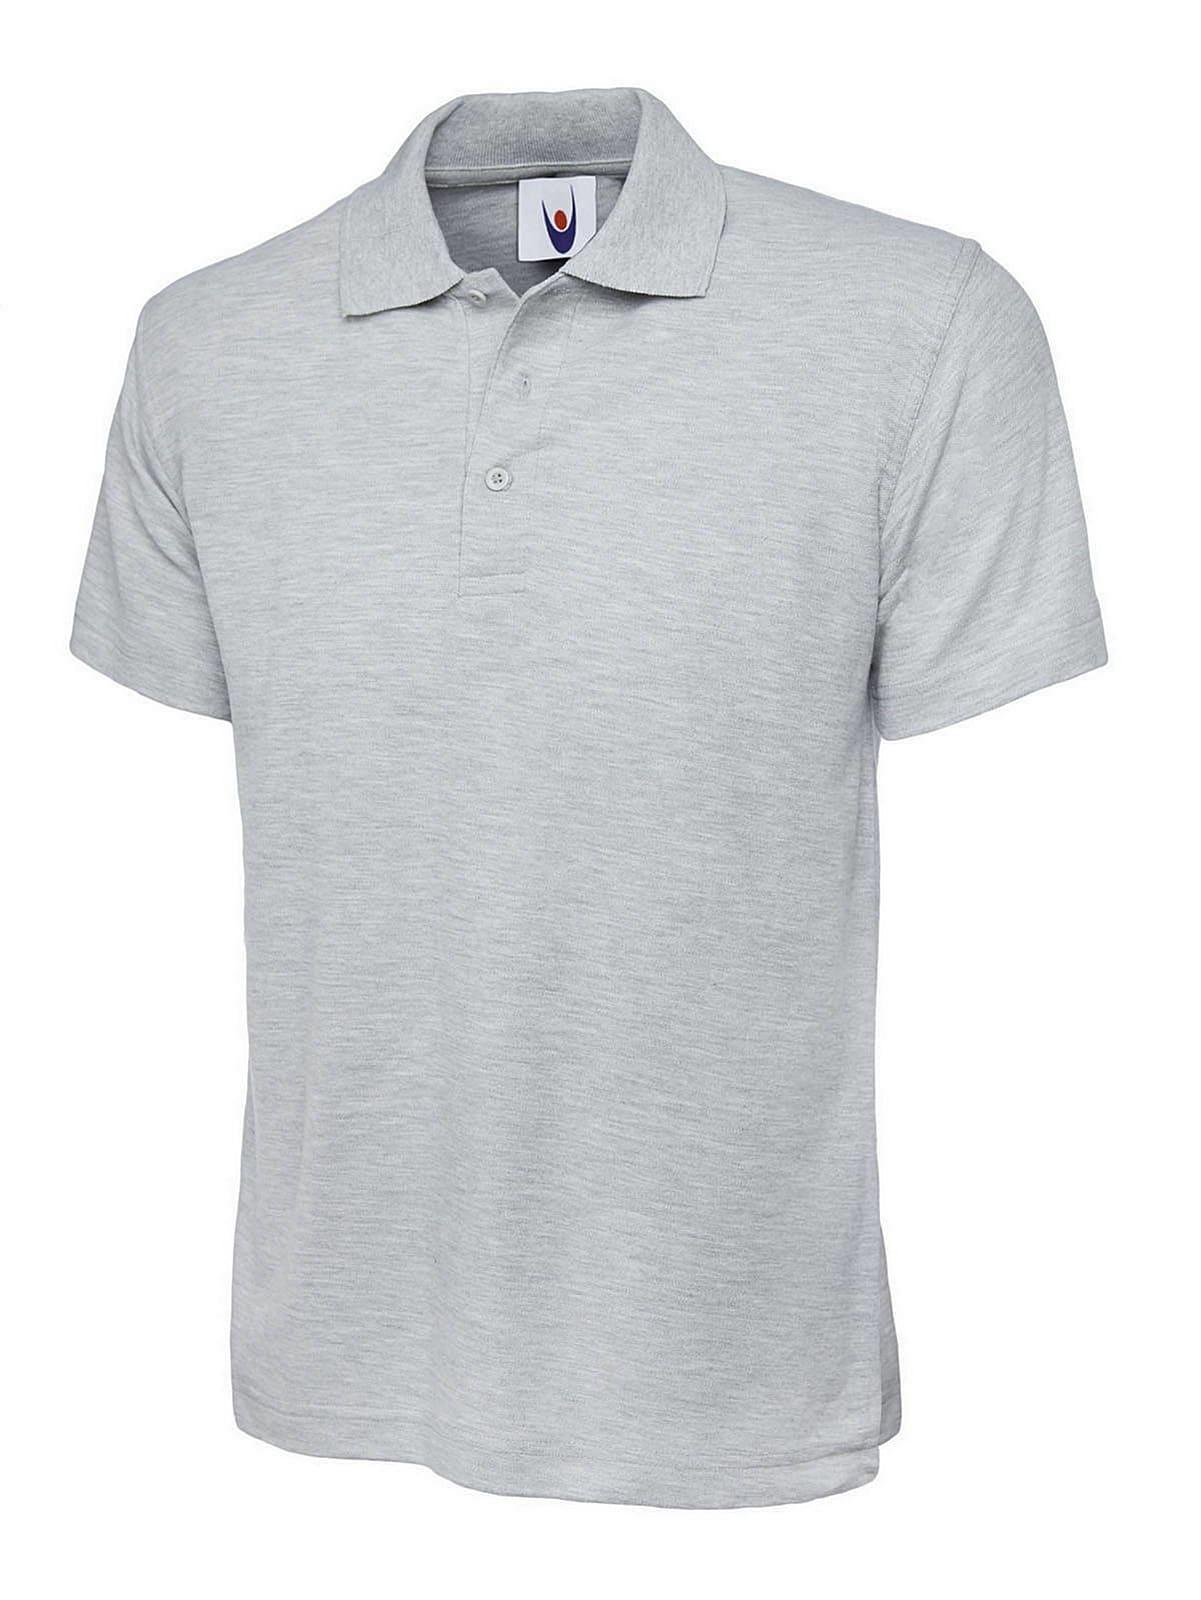 Uneek 220GSM Classic Polo Shirt in Heather Grey (Product Code: UC101)